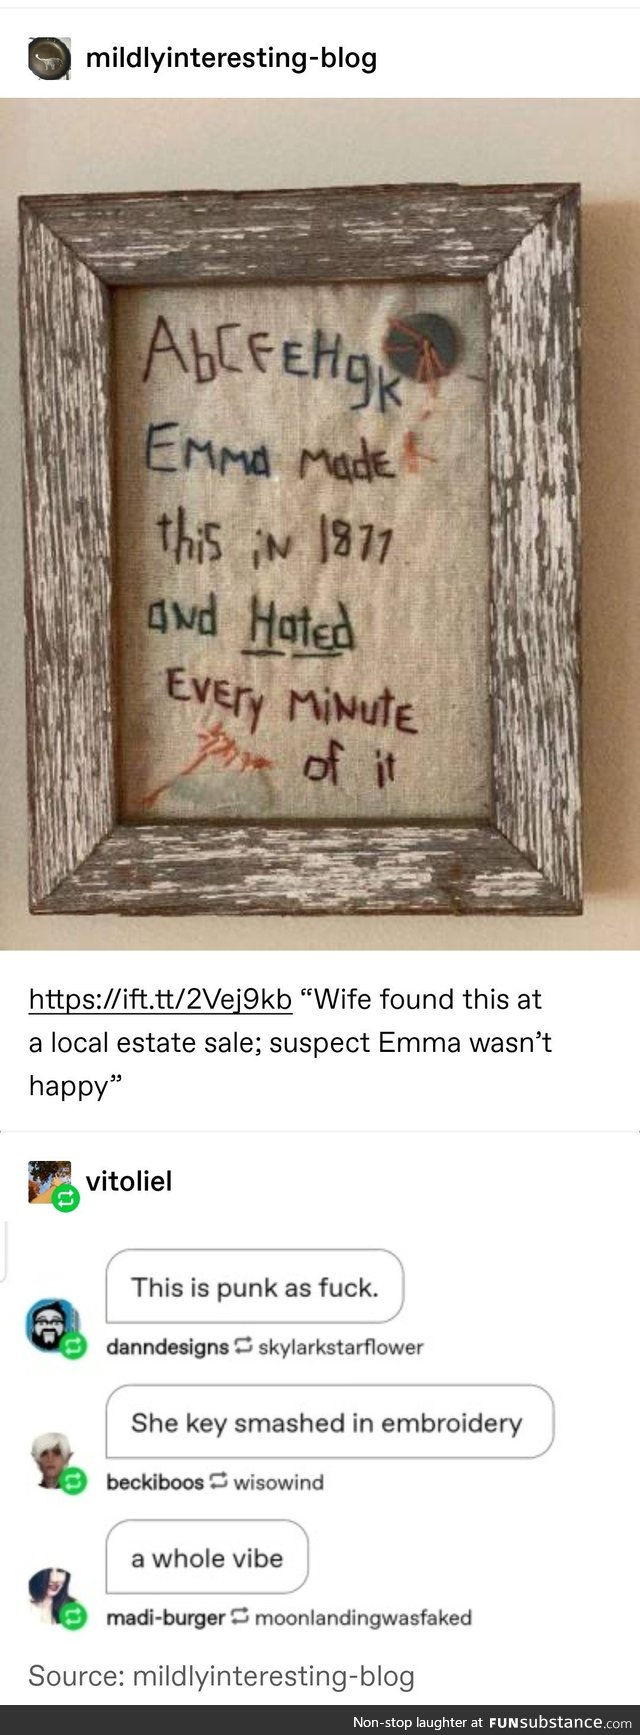 There's nothing like the angst of Emma